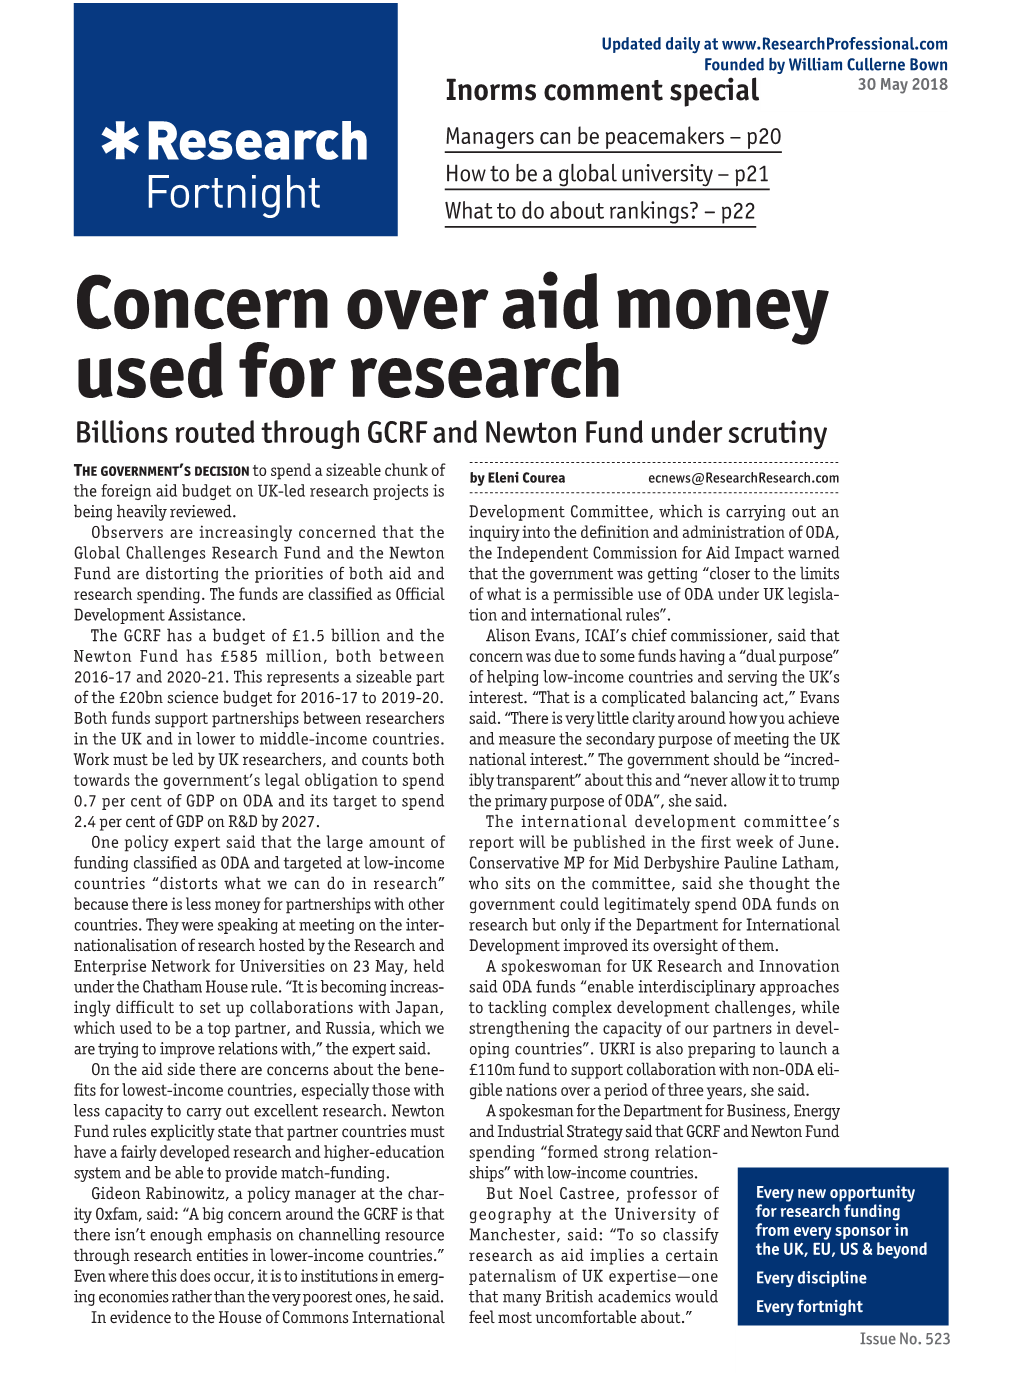 Concern Over Aid Money Used for Research Billions Routed Through GCRF and Newton Fund Under Scrutiny